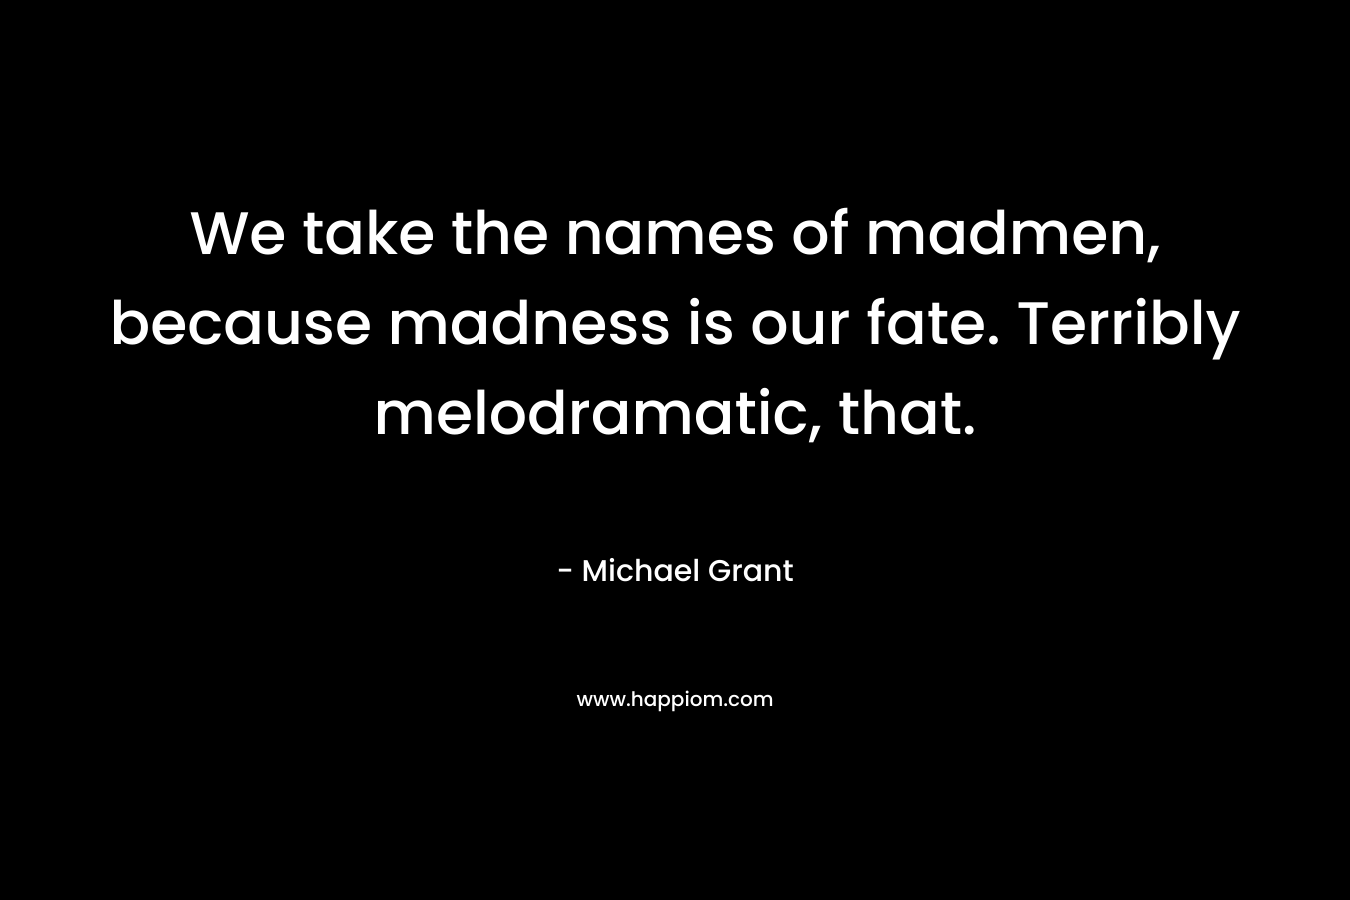 We take the names of madmen, because madness is our fate. Terribly melodramatic, that.